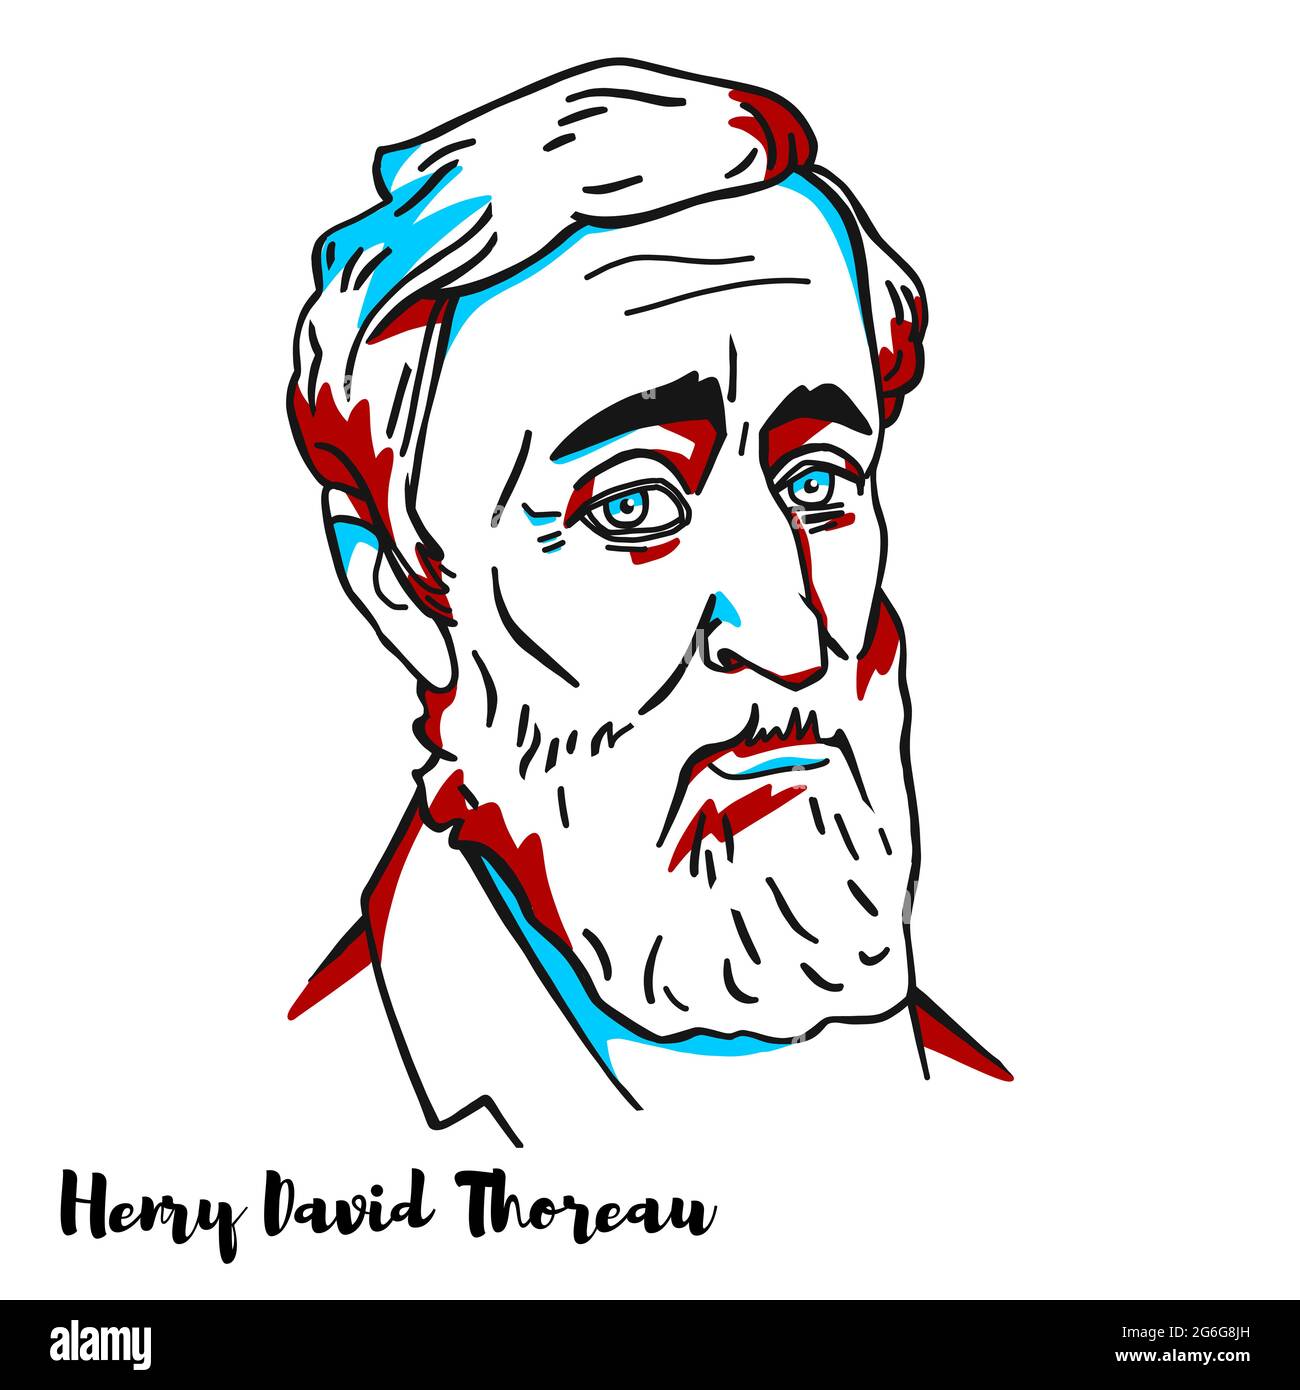 Henry David Thoreau engraved vector portrait with ink contours. American essayist, poet, and philosopher. A leading transcendentalist, Thoreau is best Stock Vector